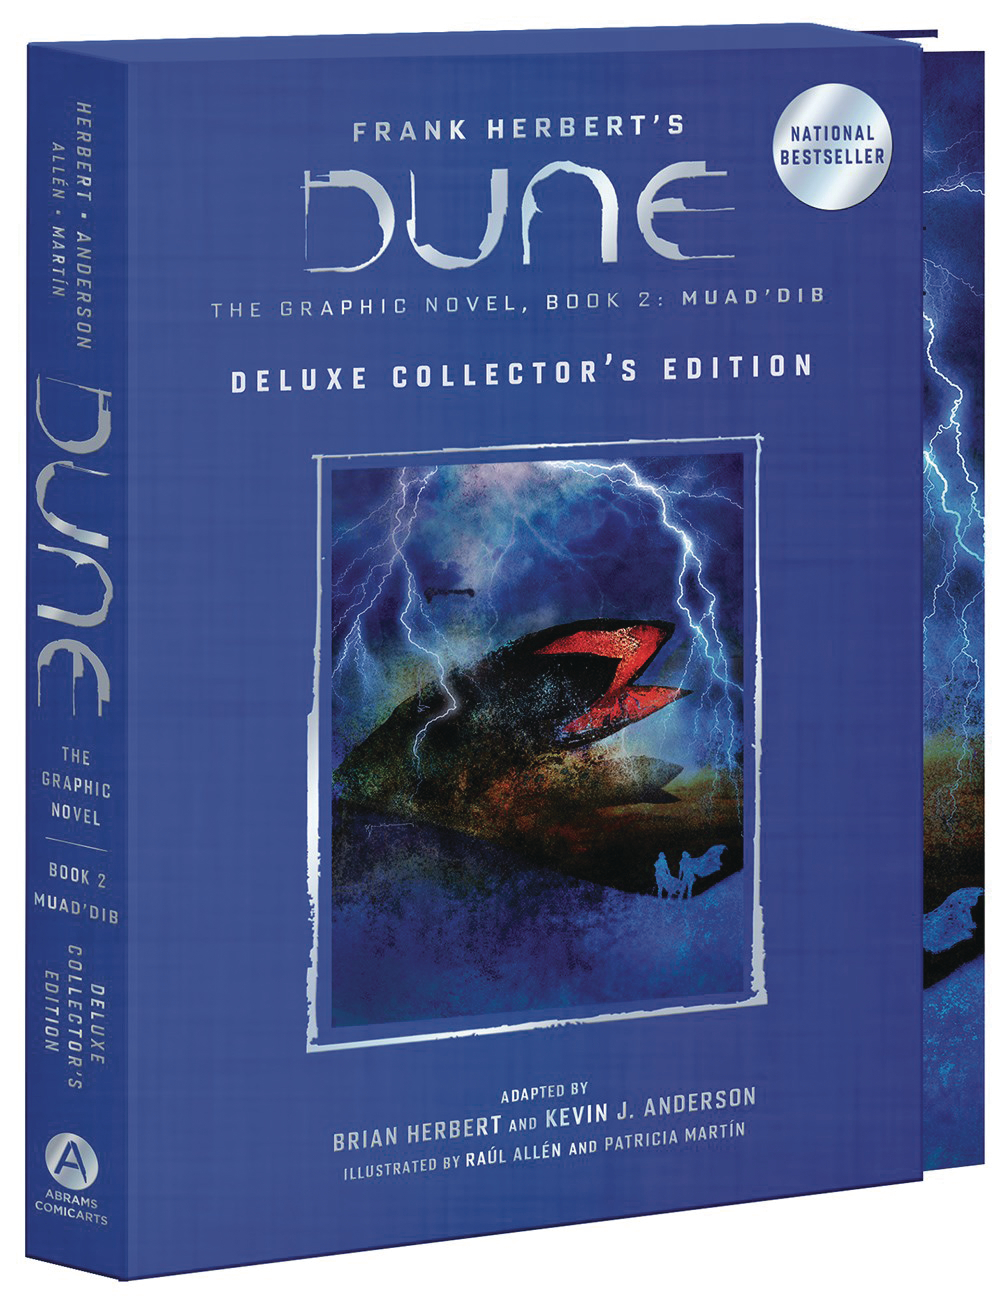 Dune Deluxe Collected Edition Graphic Novel Volume 2 Muad Dib